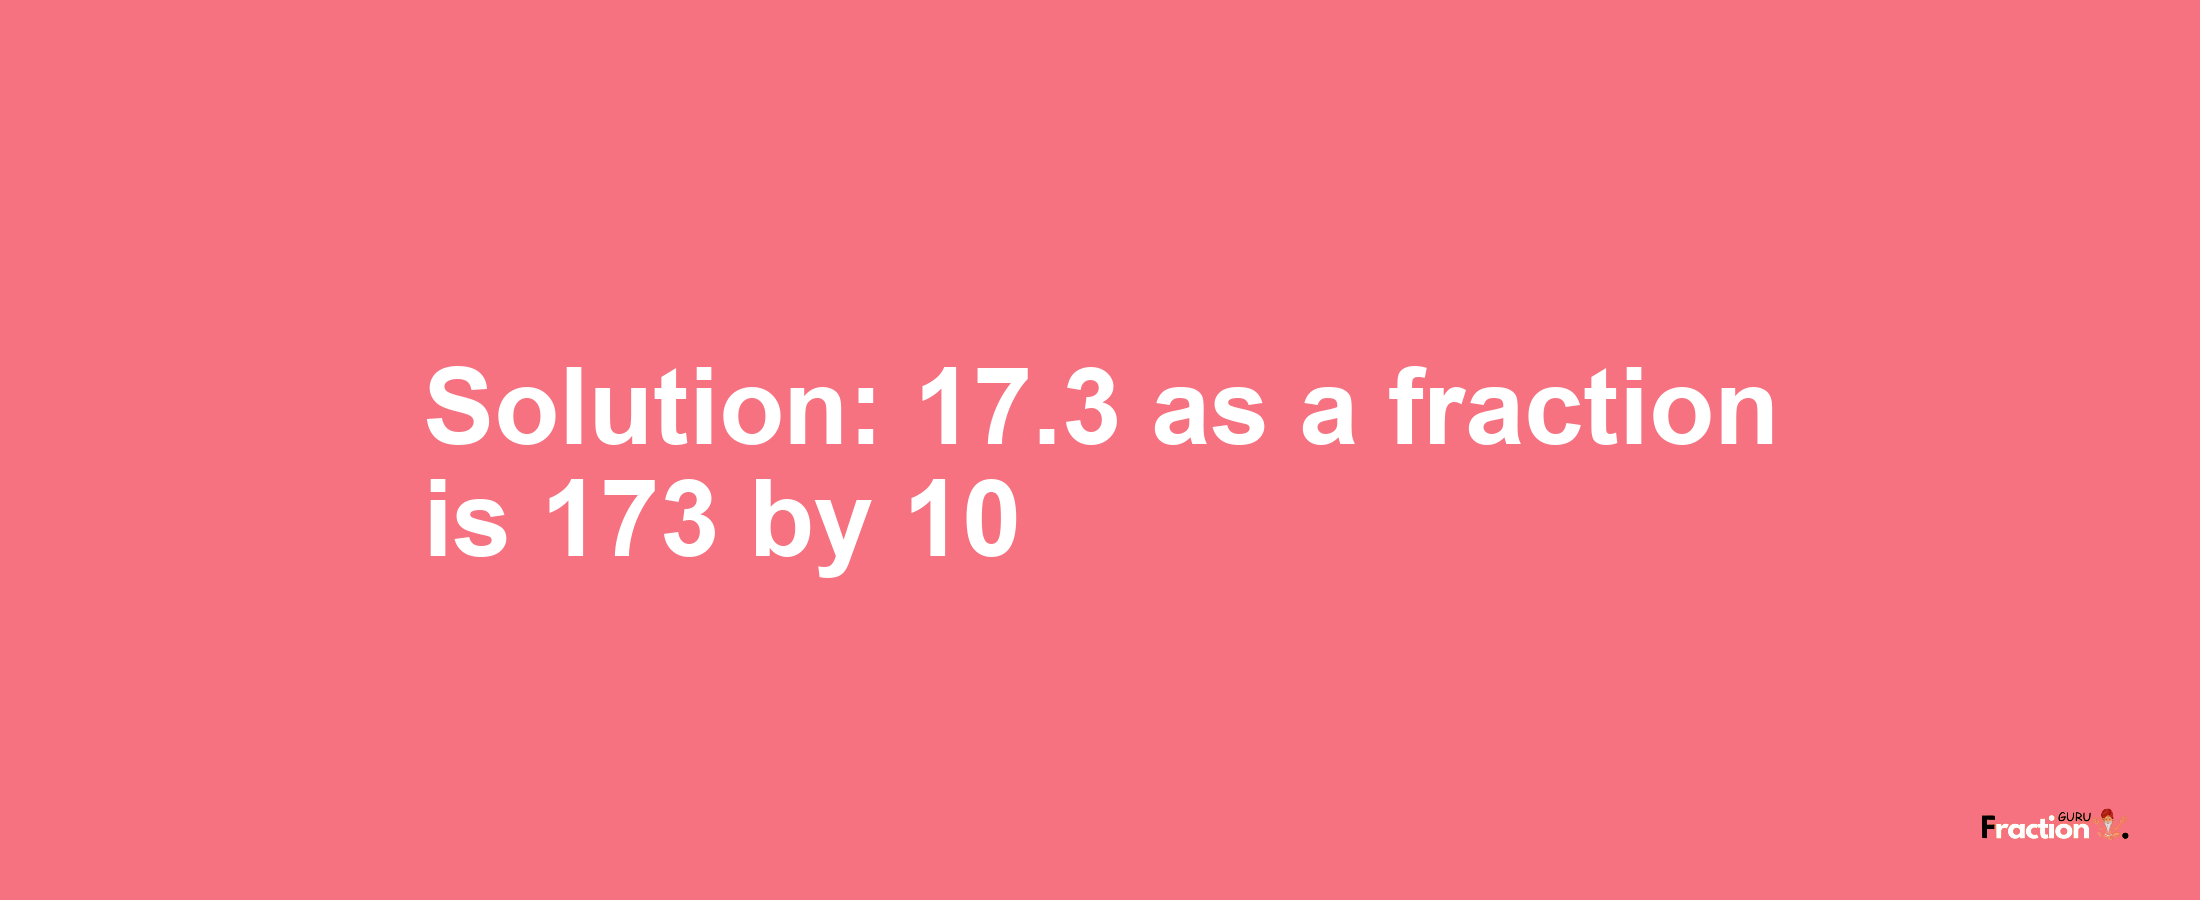 Solution:17.3 as a fraction is 173/10